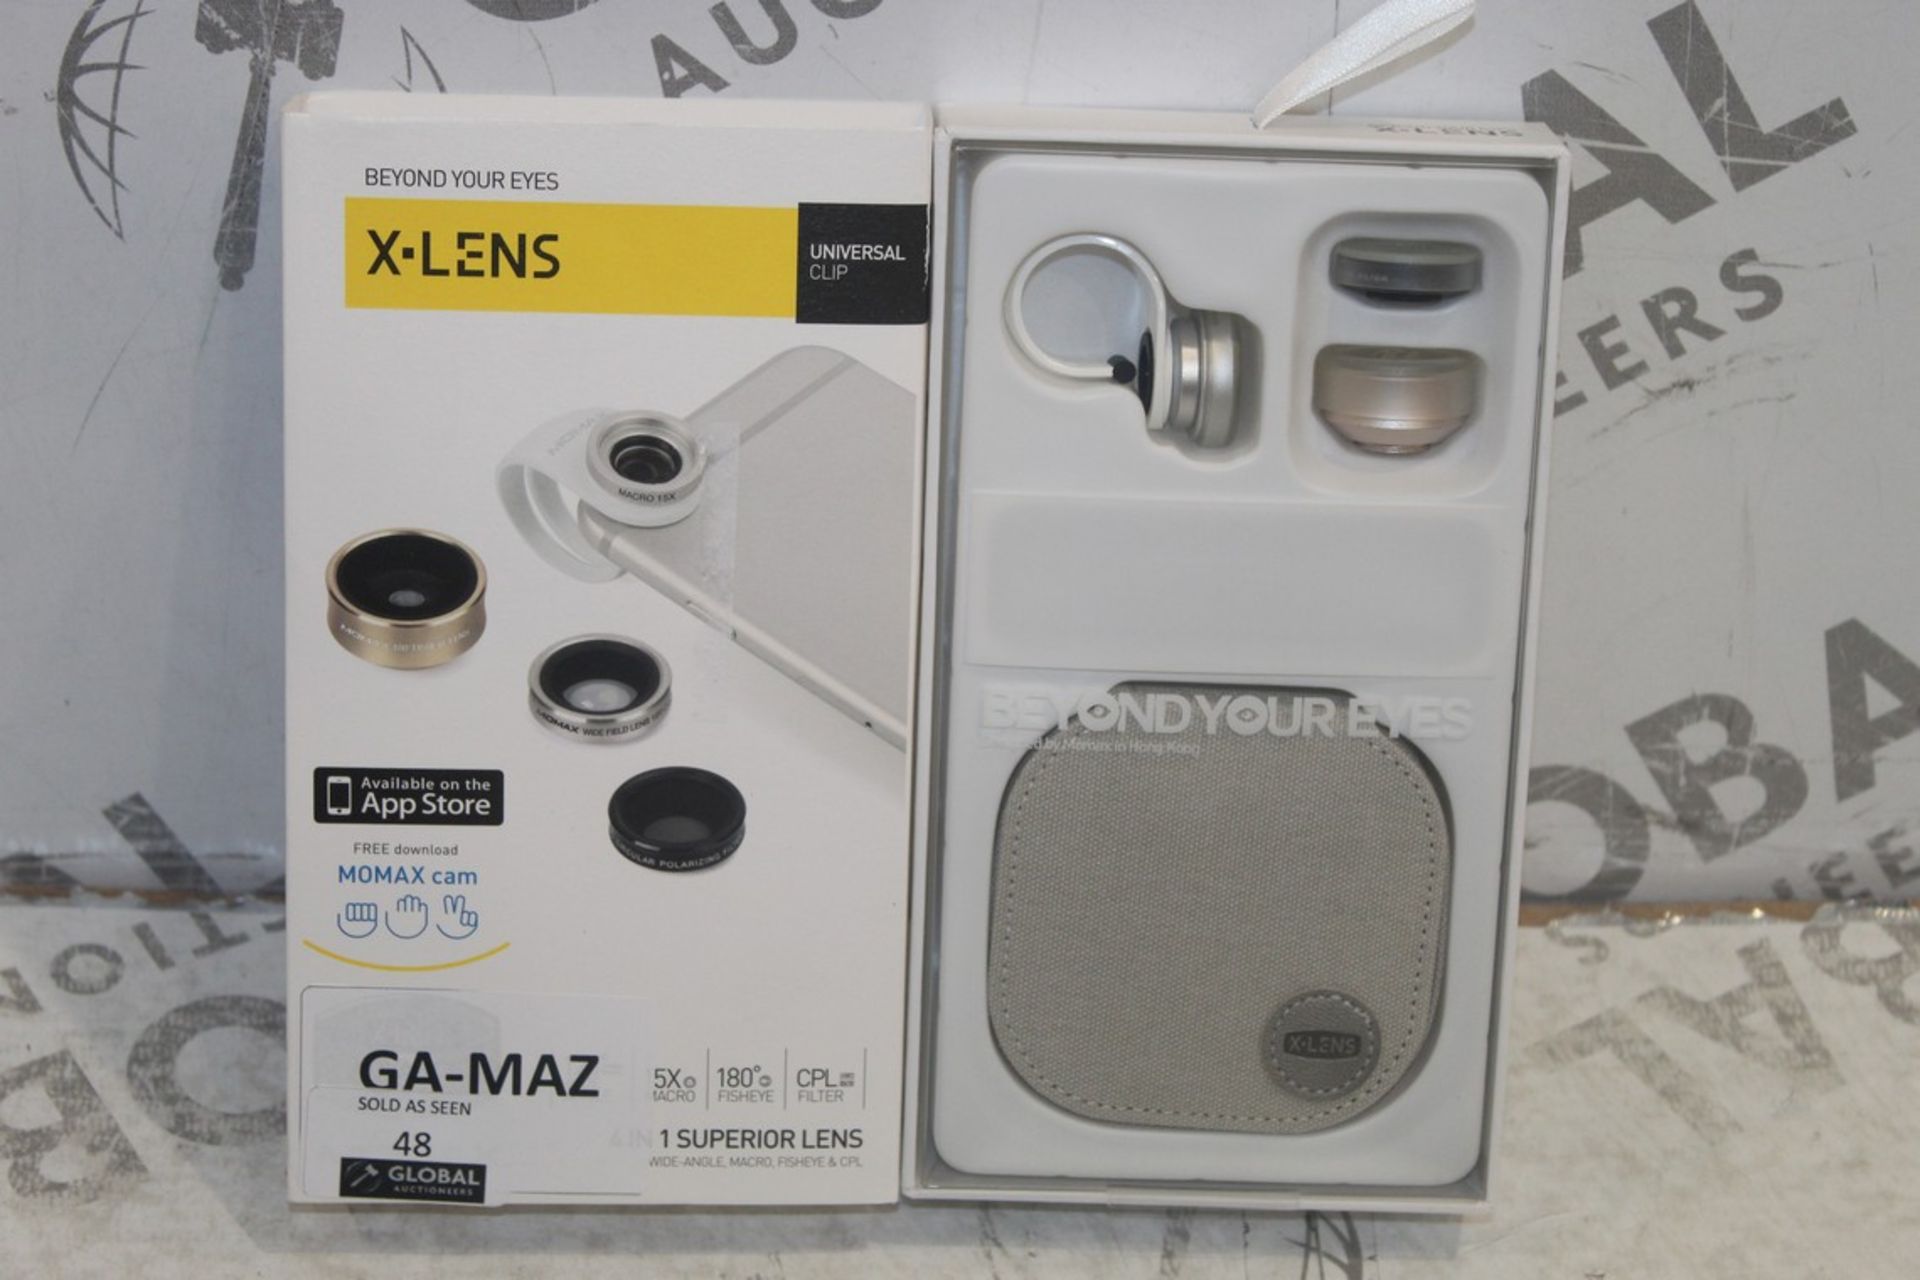 Lot To Contain 5 Momax Beyond Your Eyes X-Lens Combined RRP £150 (Pictures Are For Illustration